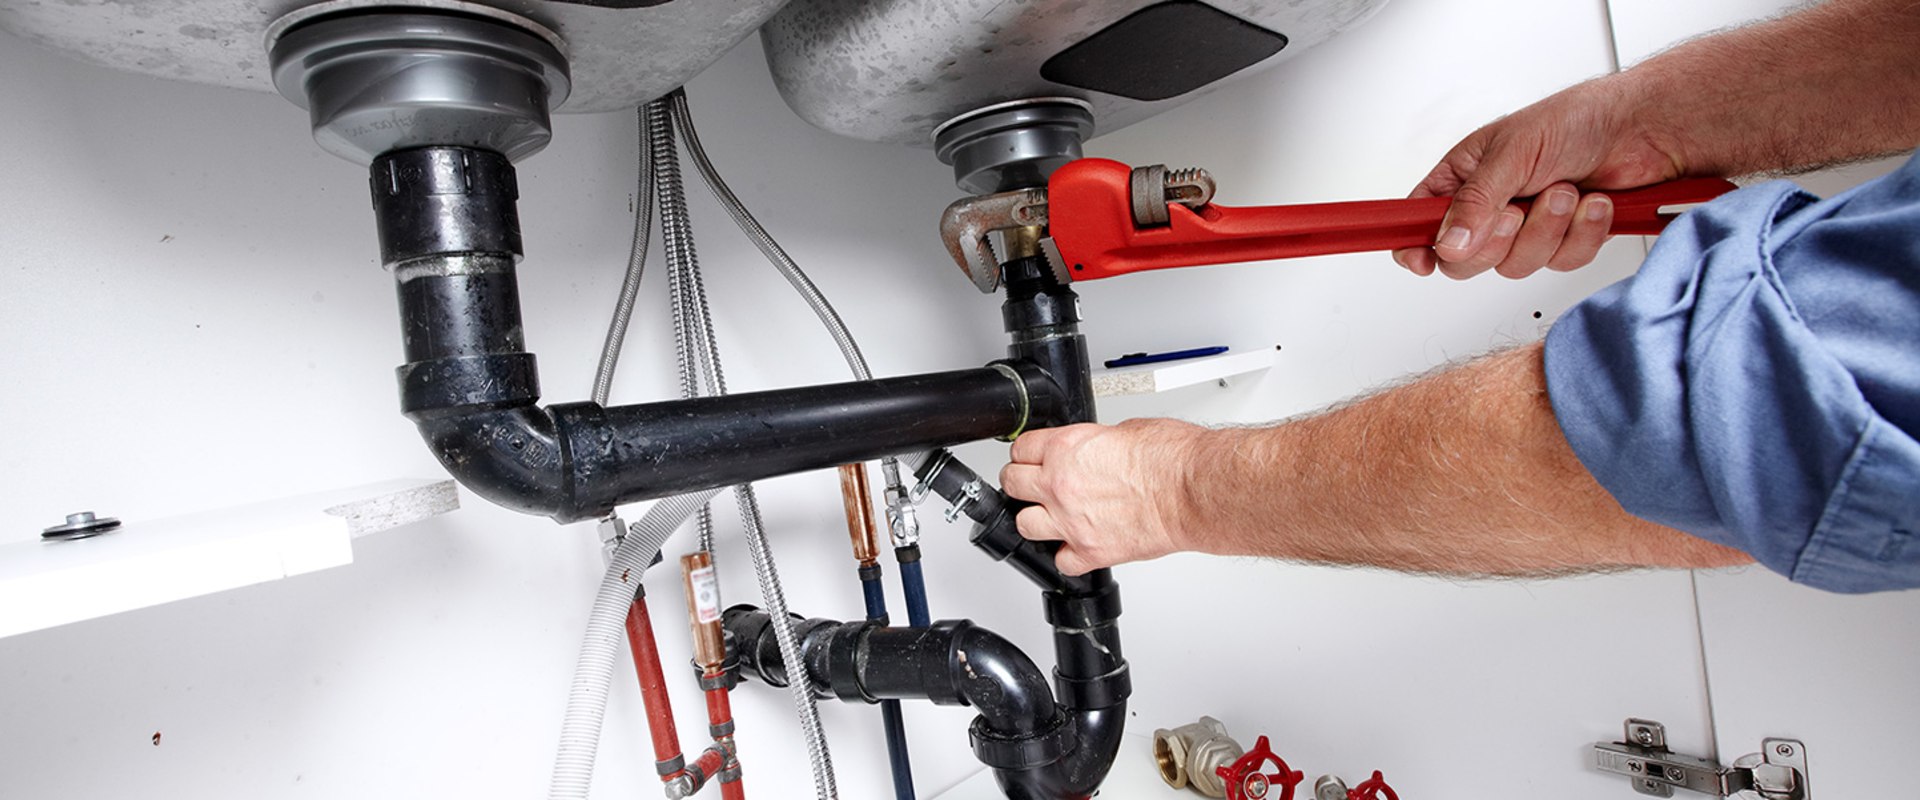 Plumbing Repair Services: An Overview